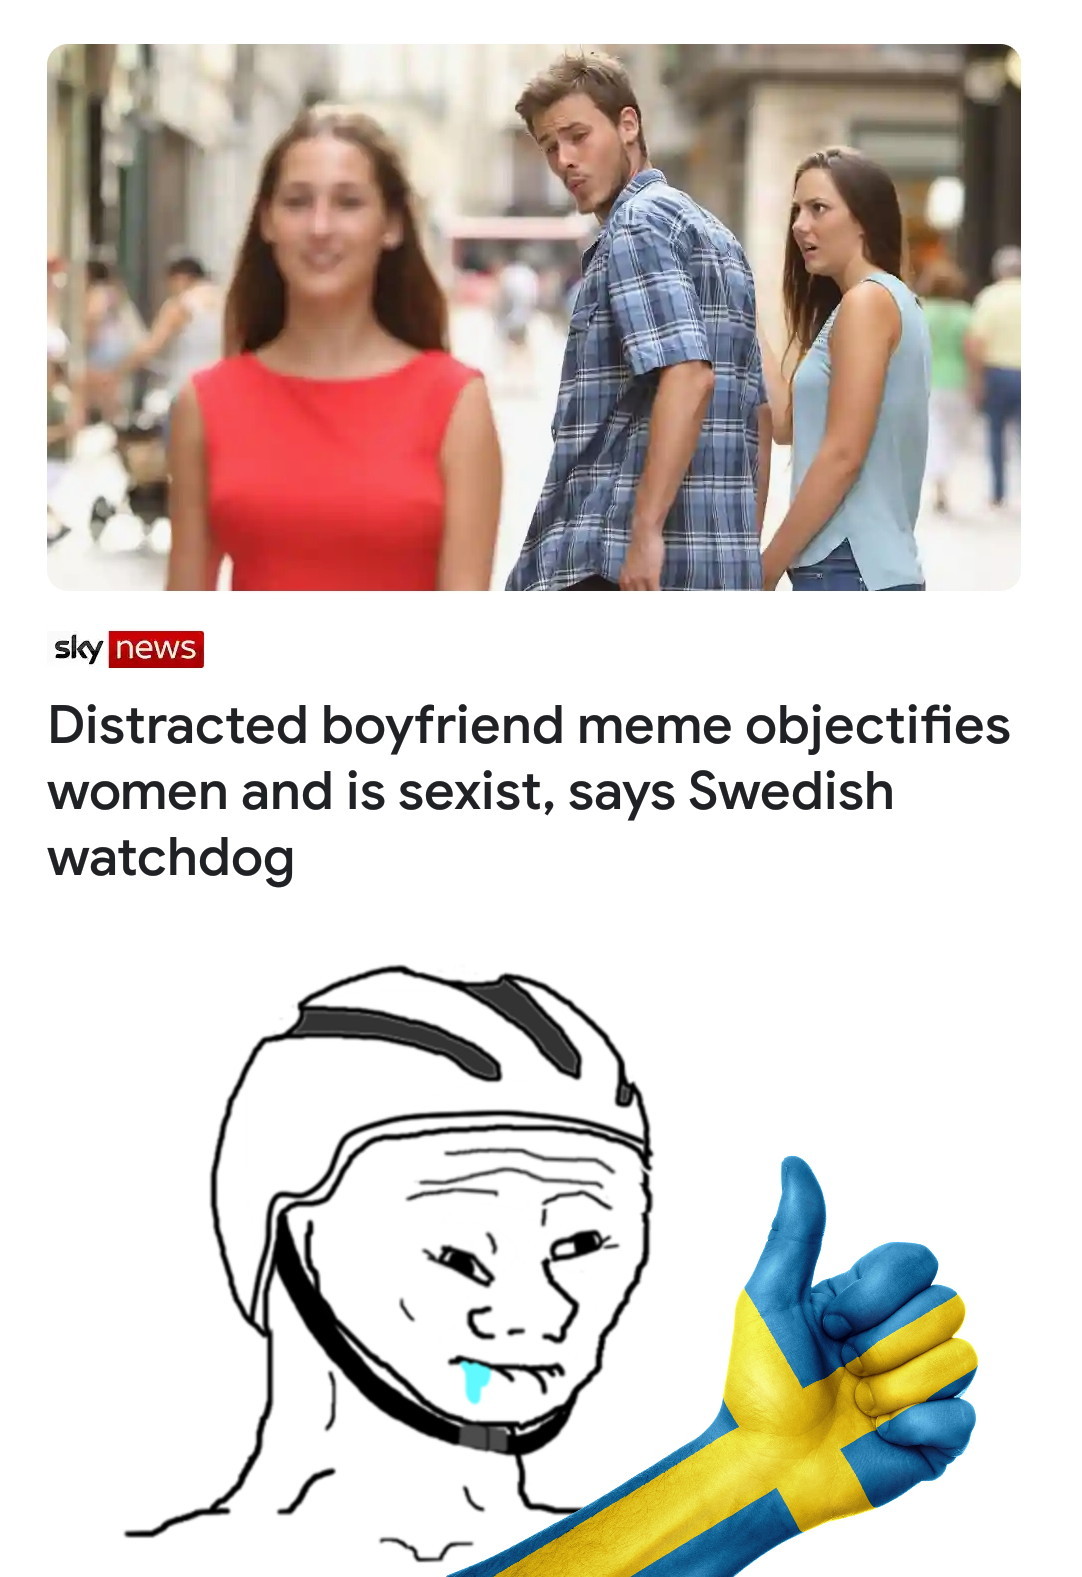 Sweden is becoming Germany 2.0 - meme